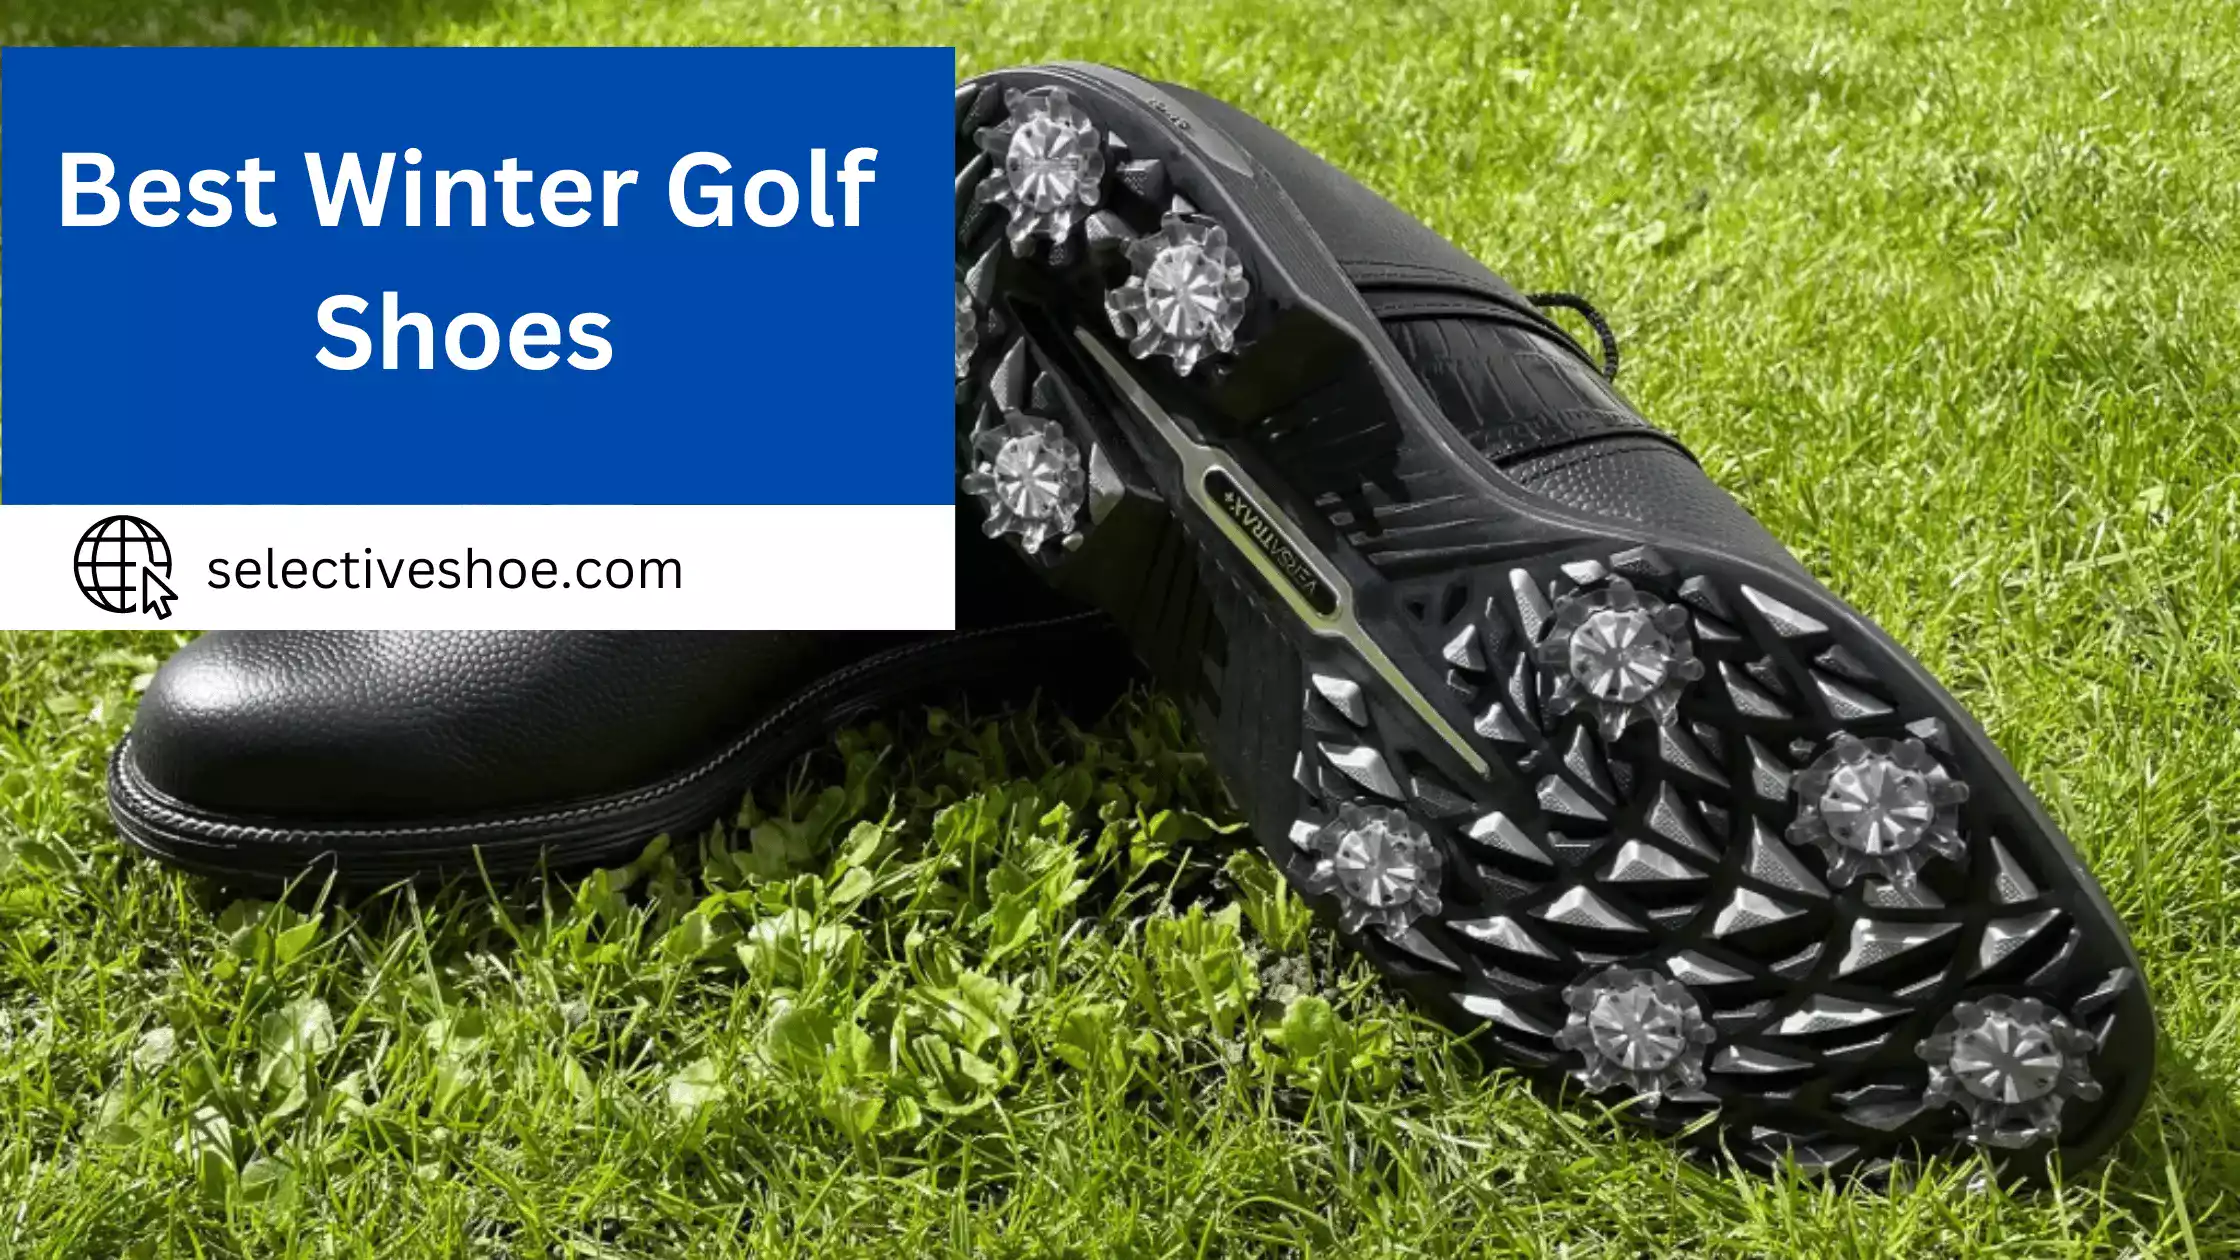 Best Winter Golf Shoes - A Comprehensive Guide